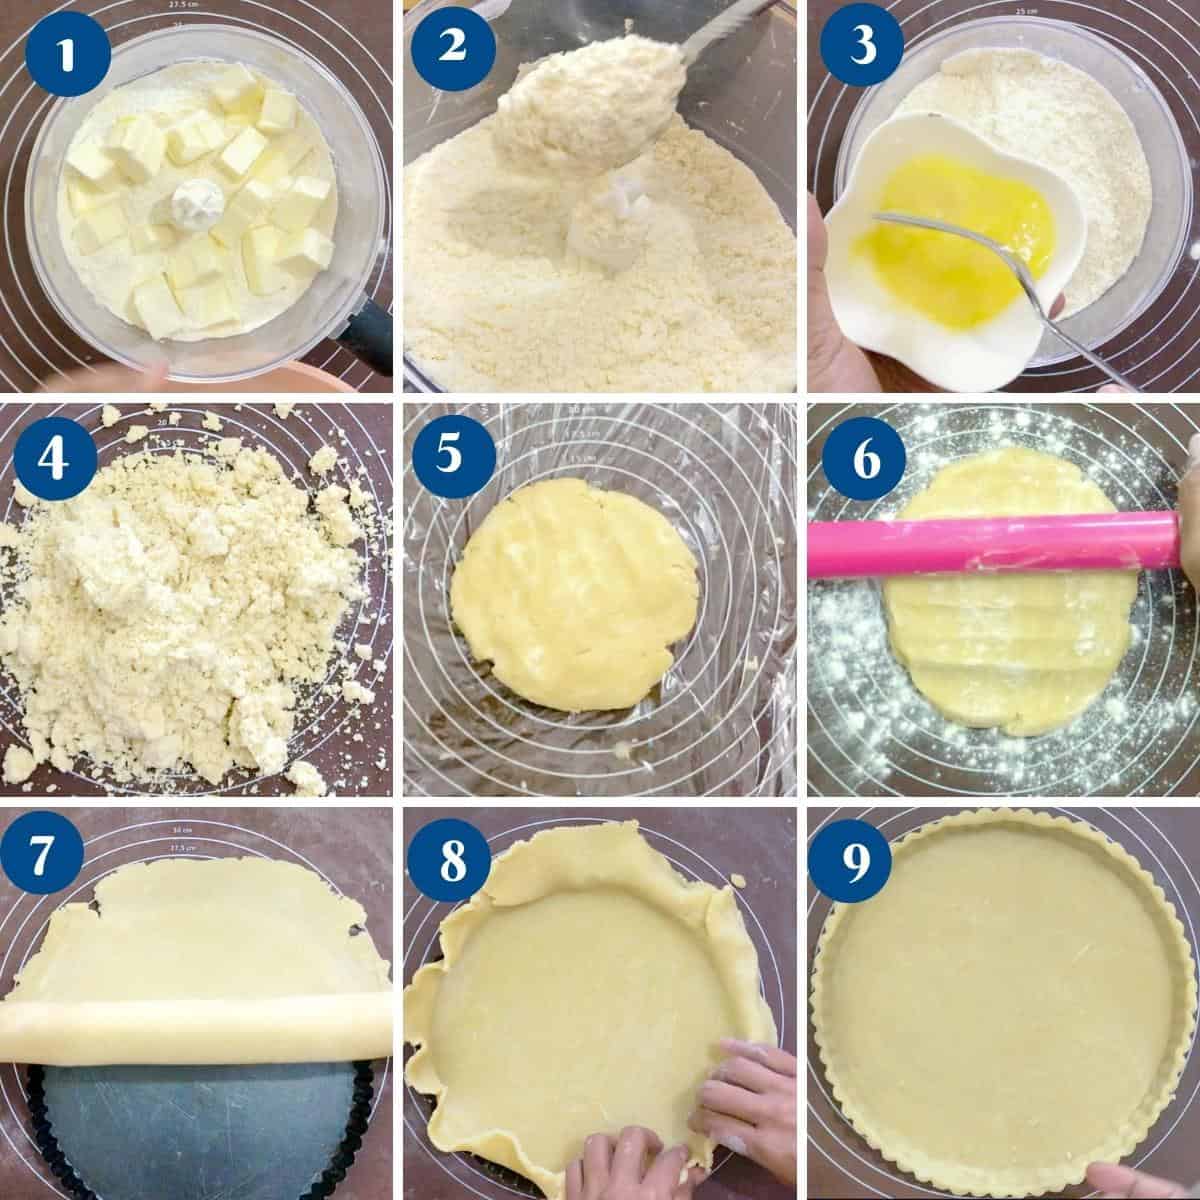 Progress pictures making the pie crust.